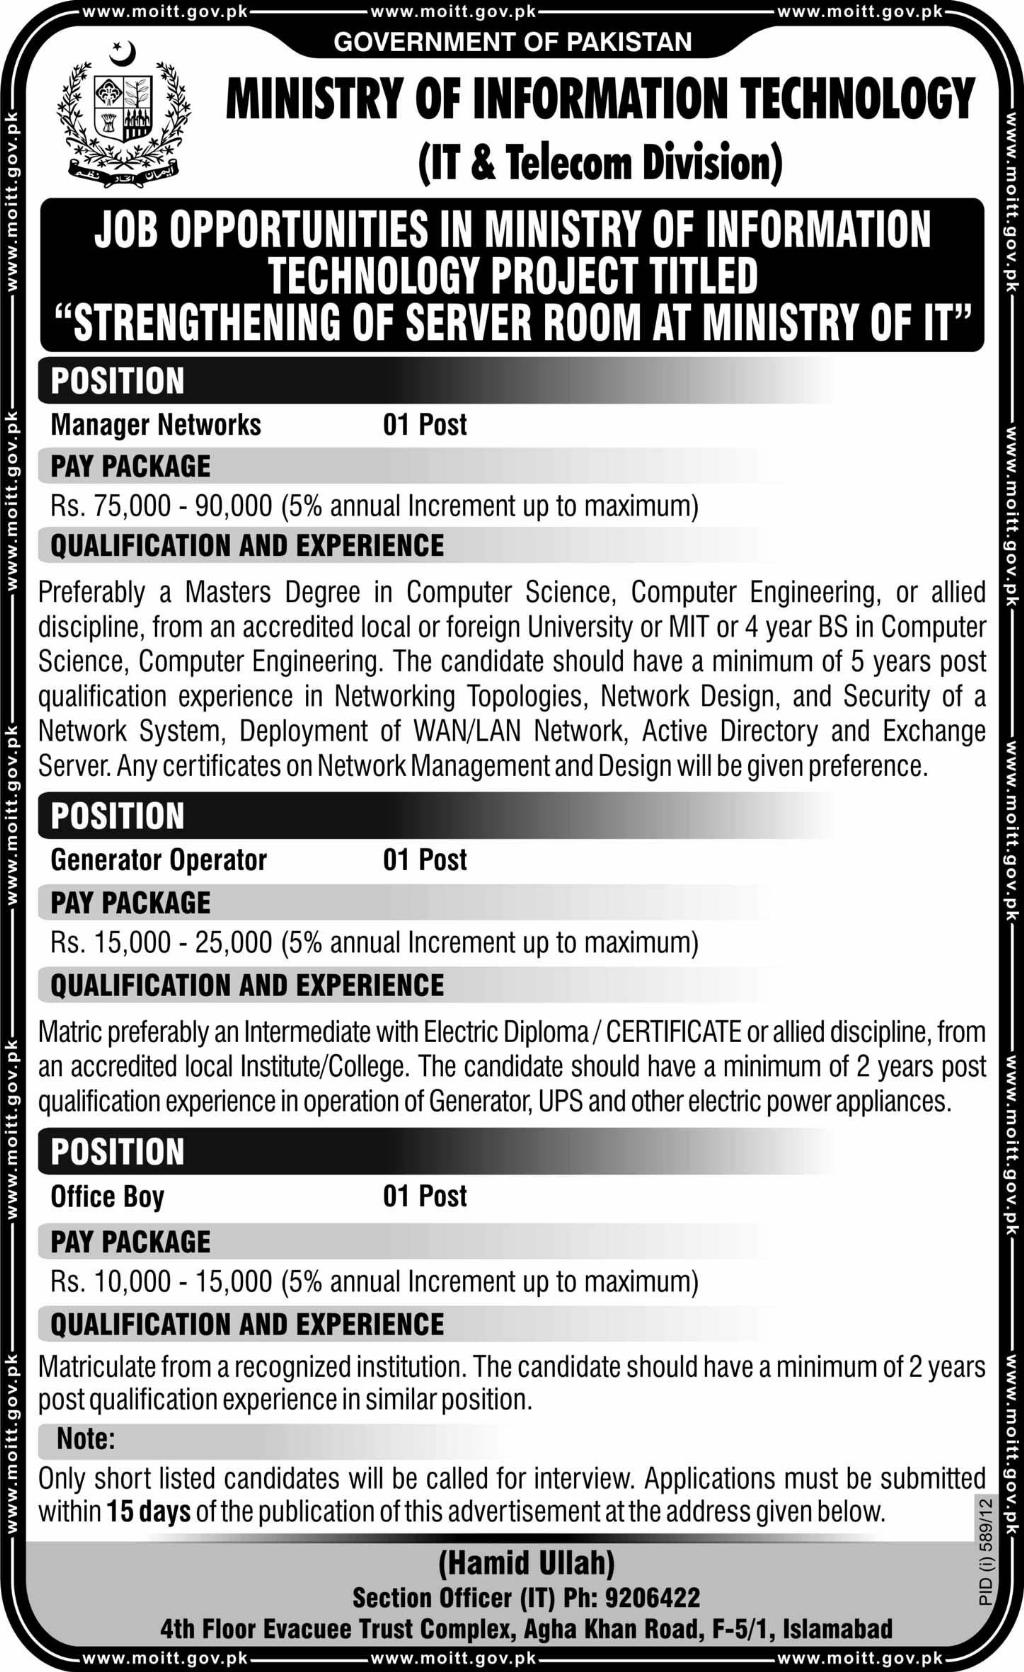 Jobs in Ministry of Information Technology, Government of Pakistan (Government Job)